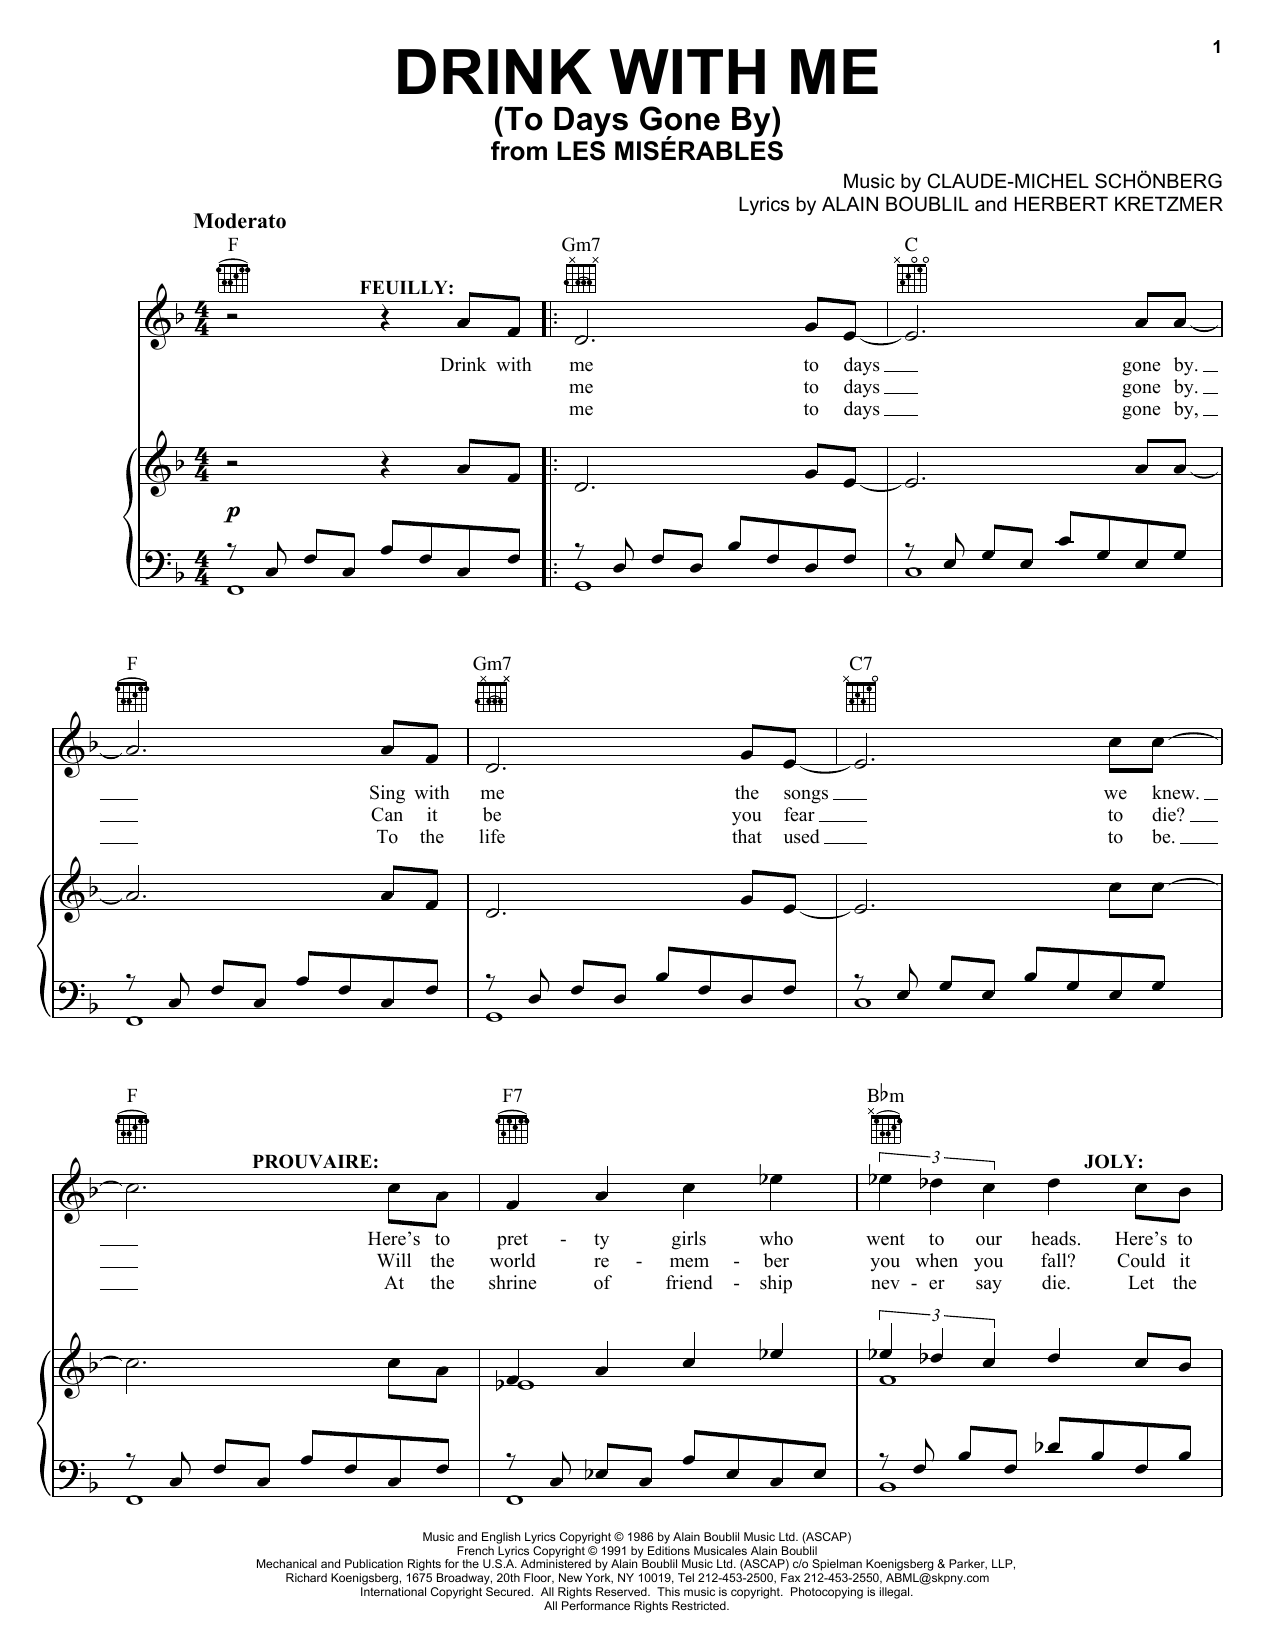 Alain Boublil Drink With Me (To Days Gone By) sheet music notes and chords. Download Printable PDF.